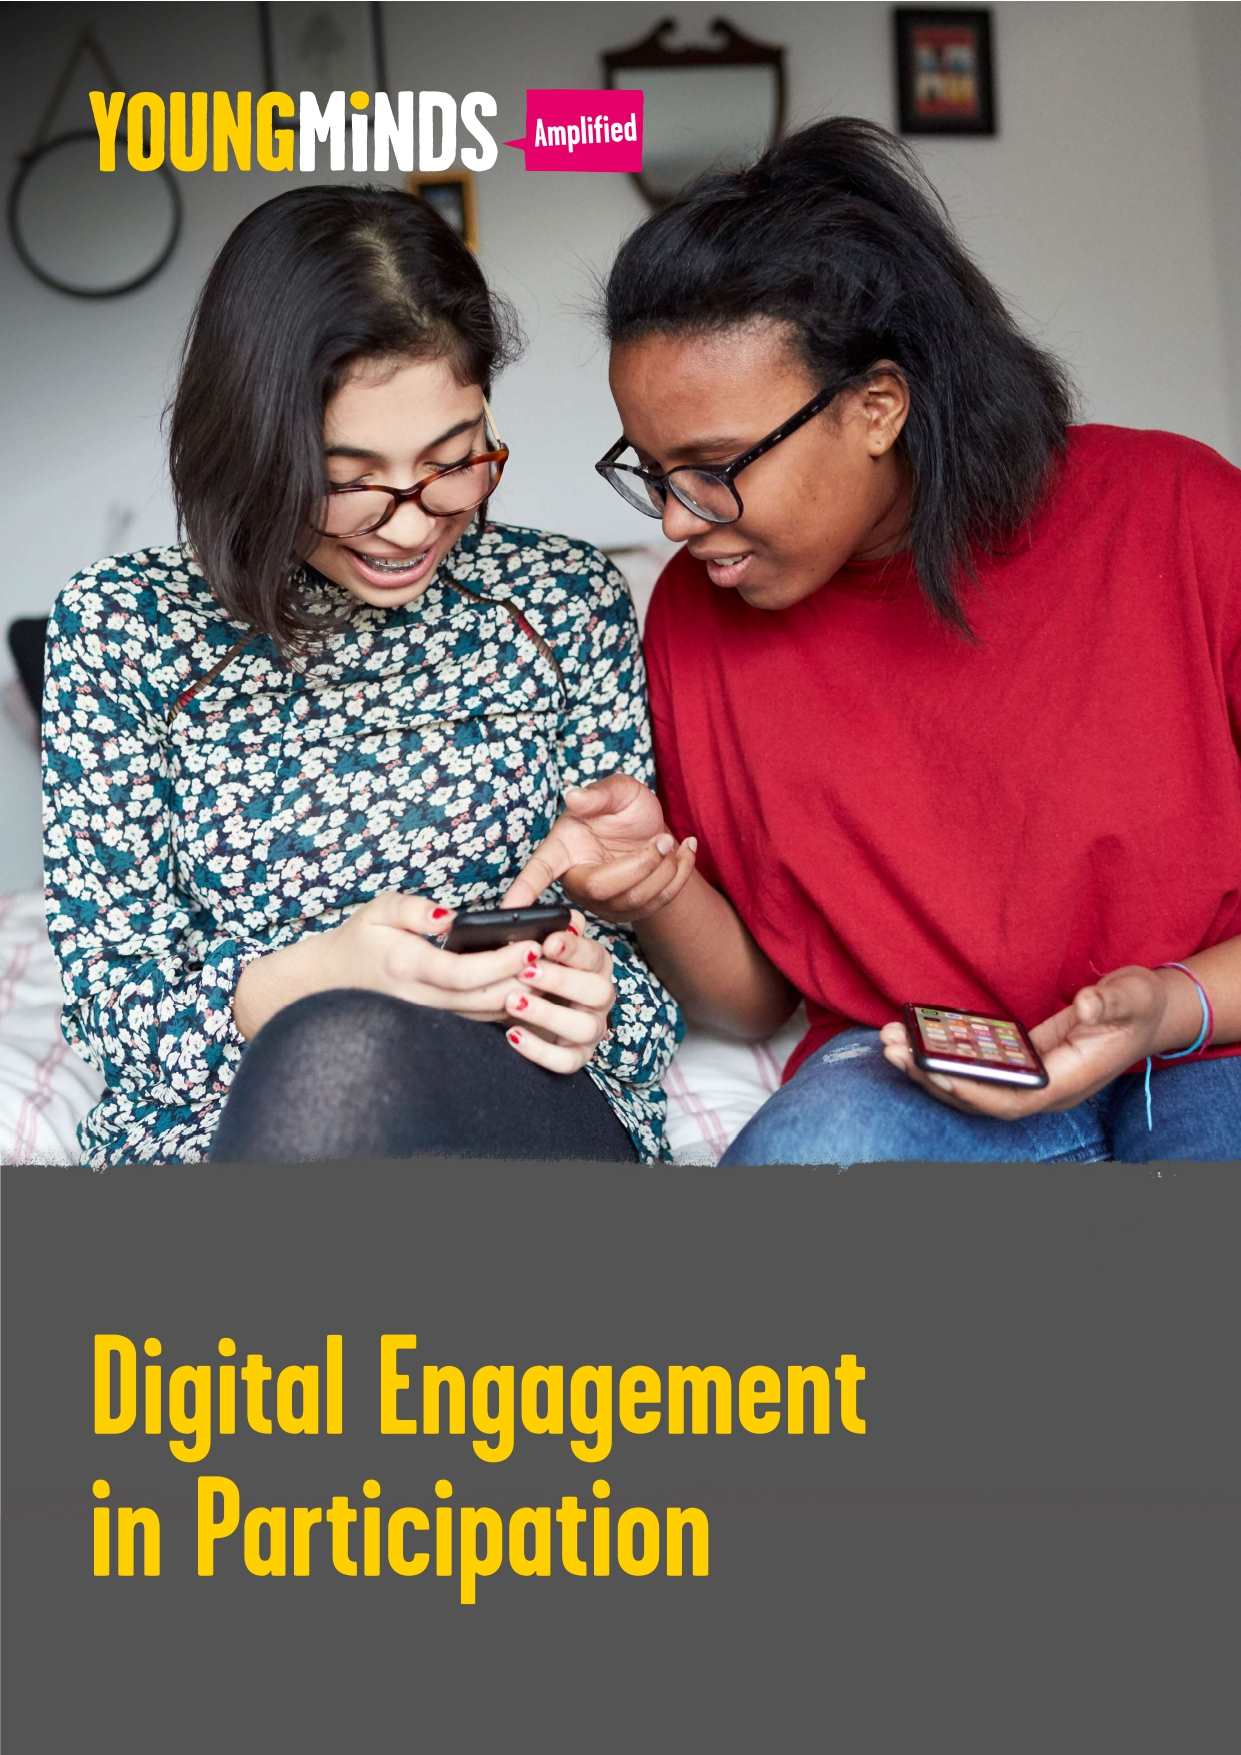 Front page cover of our sources 'Digital engagement in participation'. The cover has two young people both holding phones, they are both looking at one phone together.